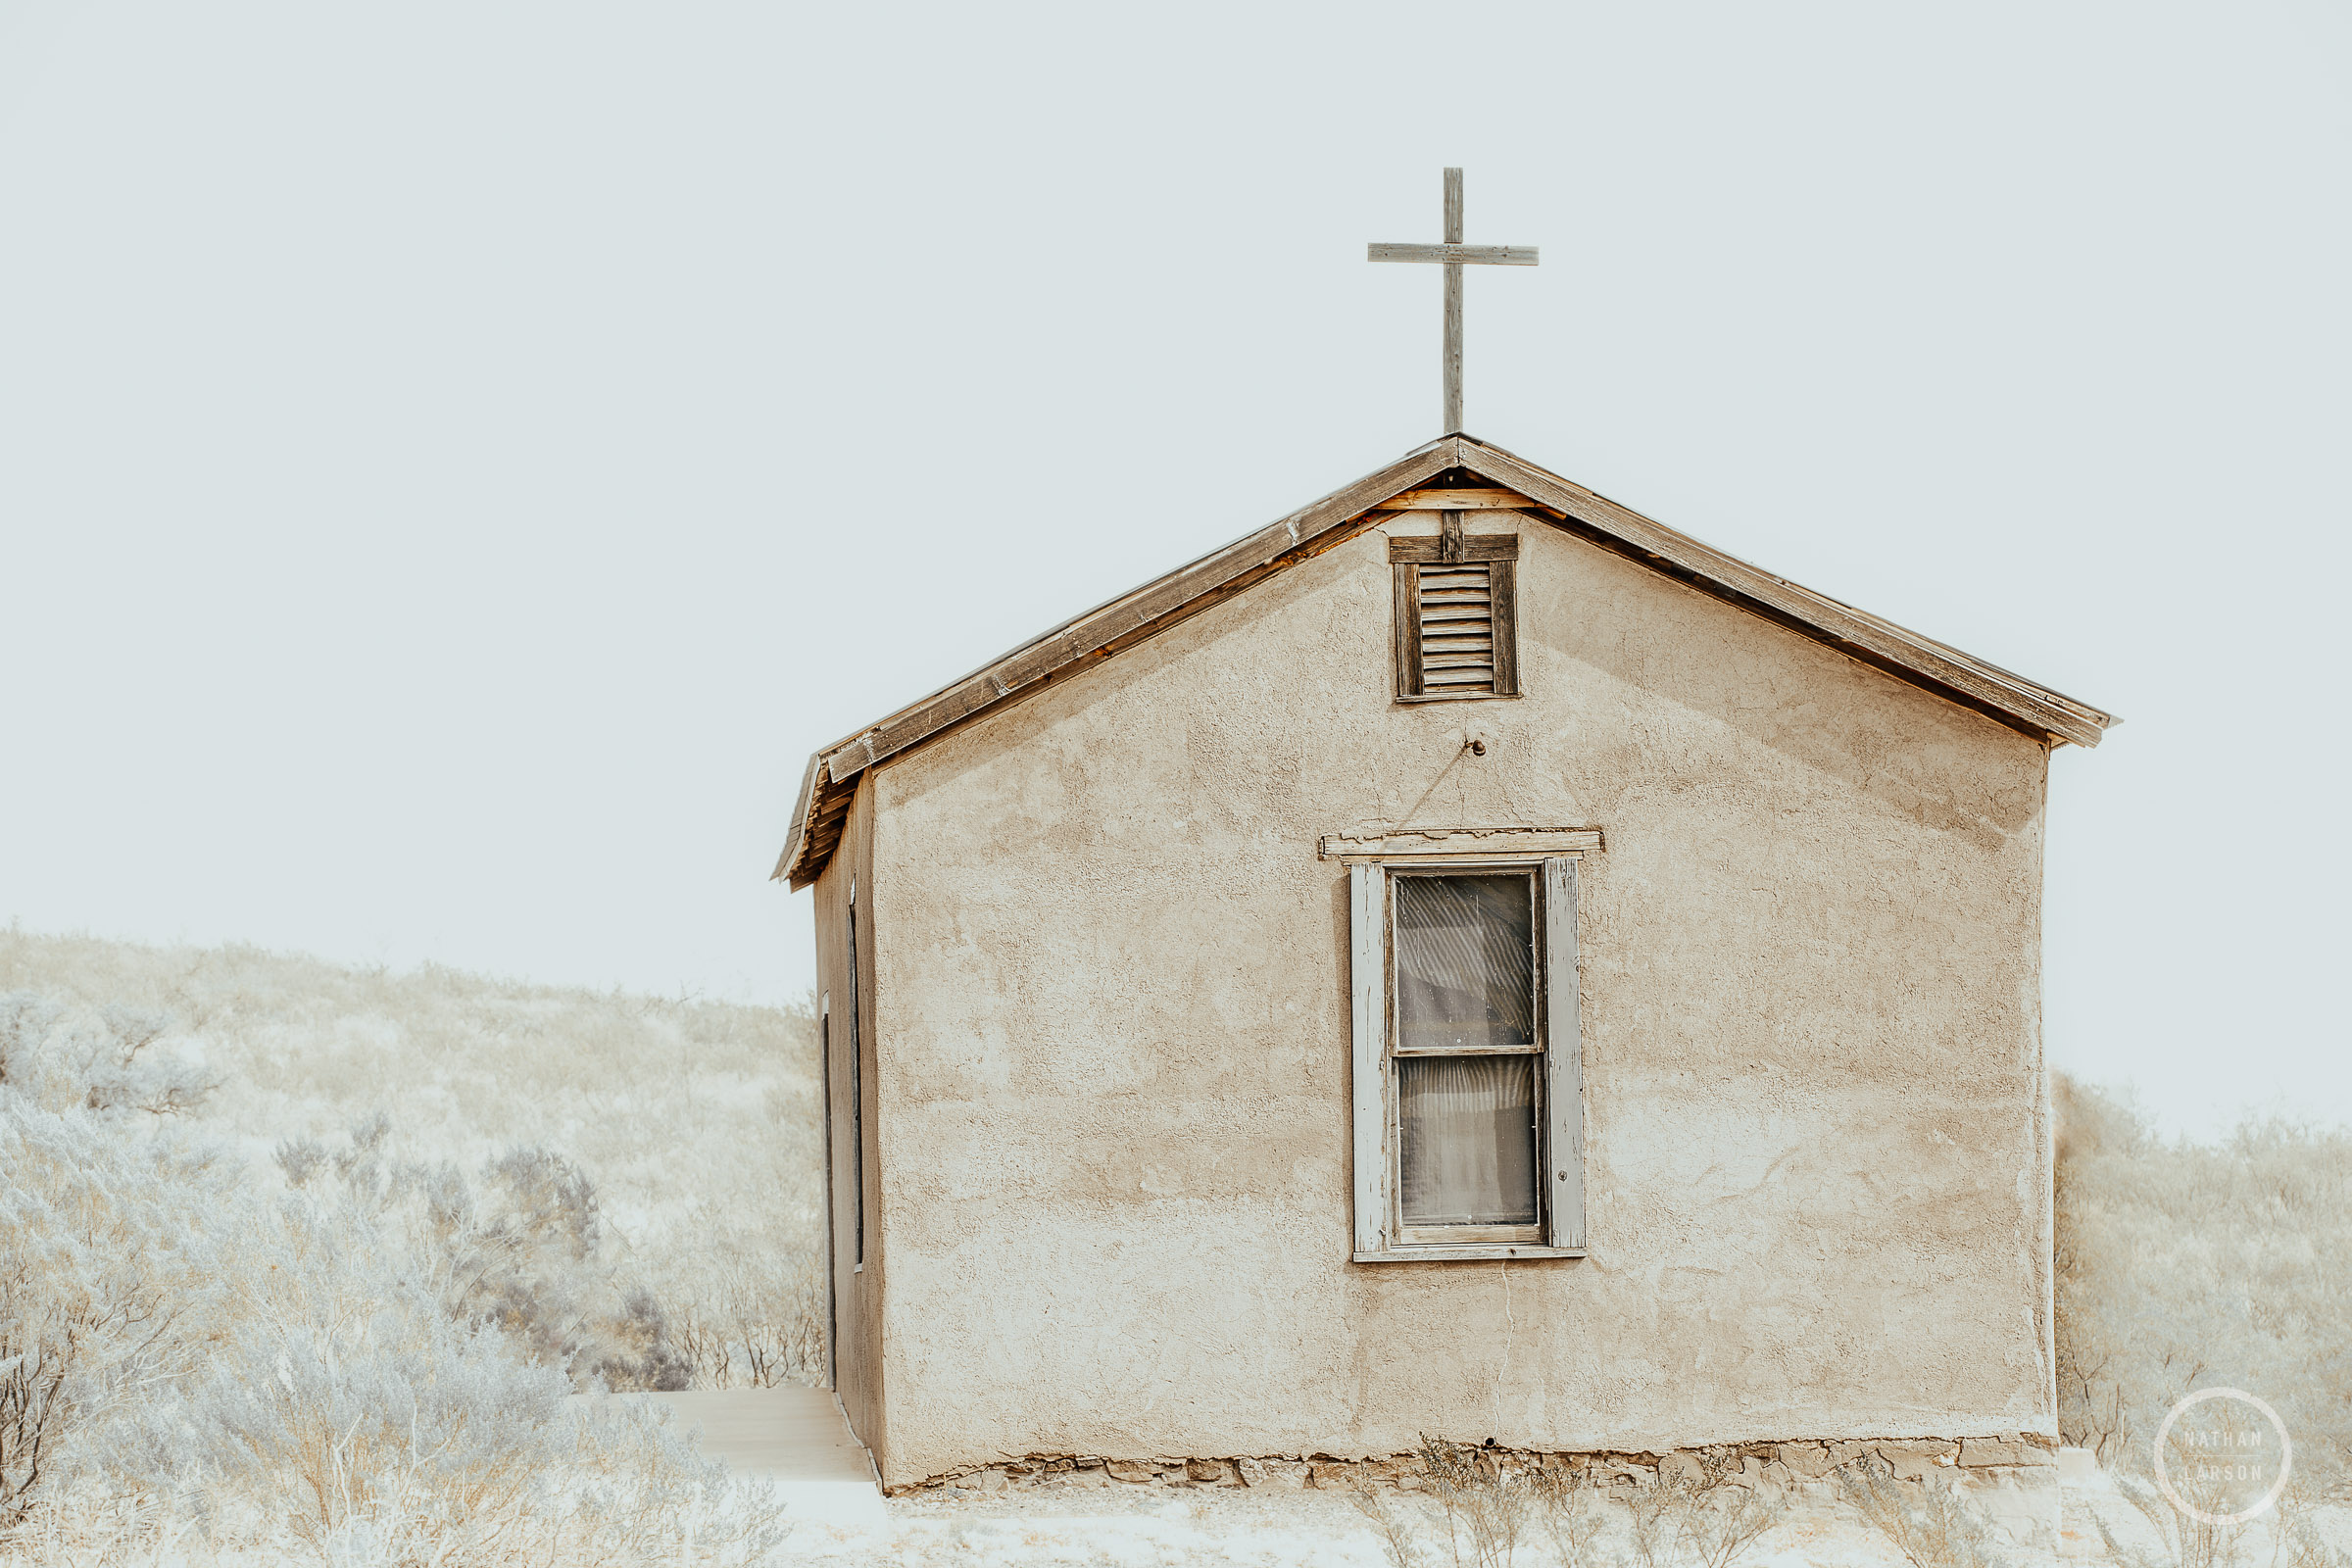 In an abandoned town in southern New Mexico, the remnants of a single room chruch stand on a small rise overlooking the valley...